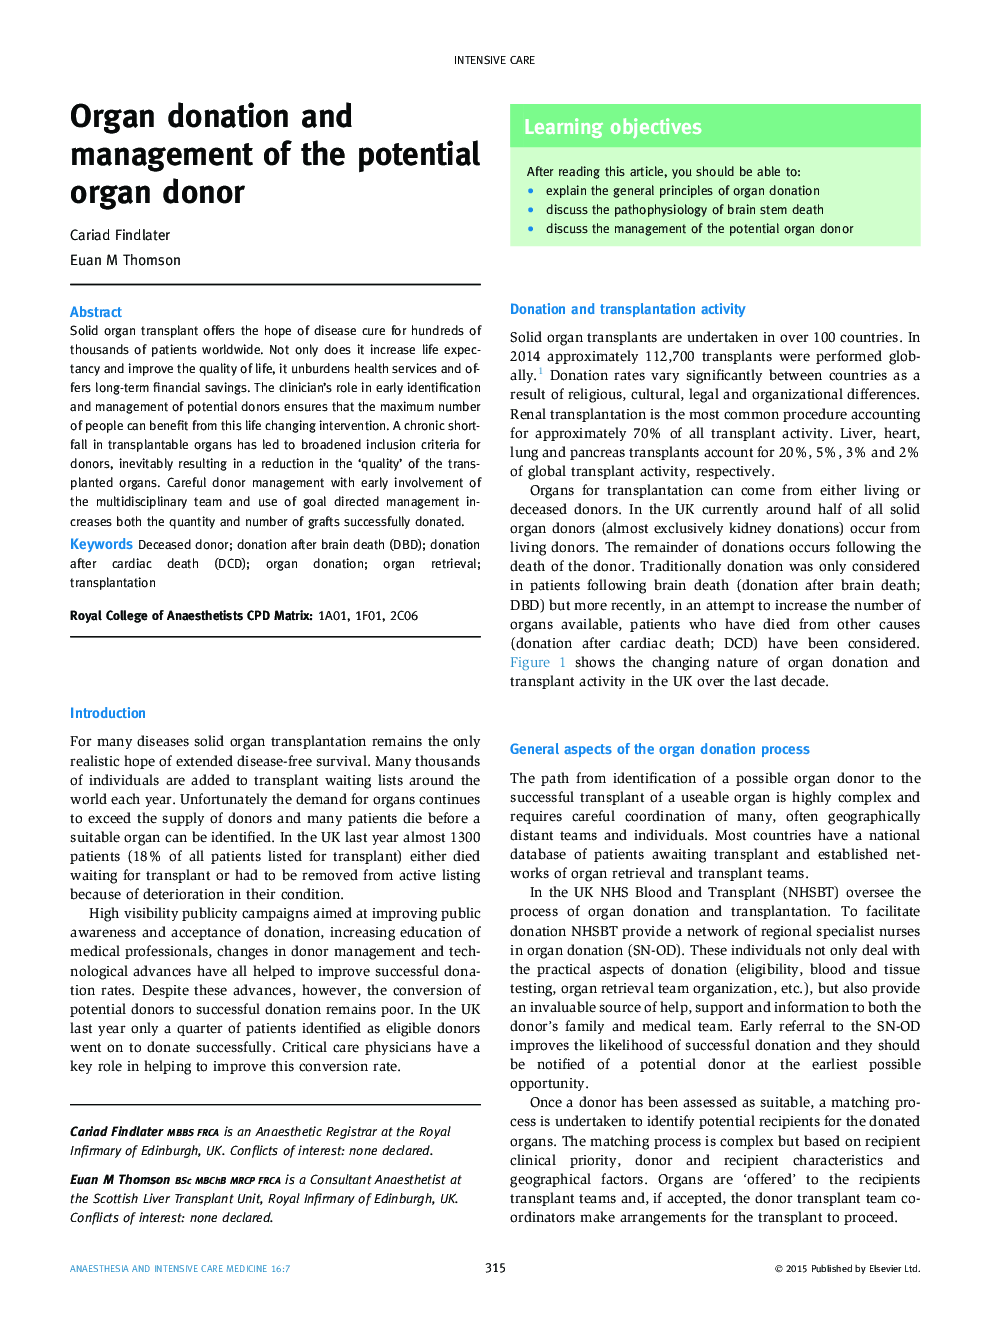 Organ donation and management of the potential organ donor